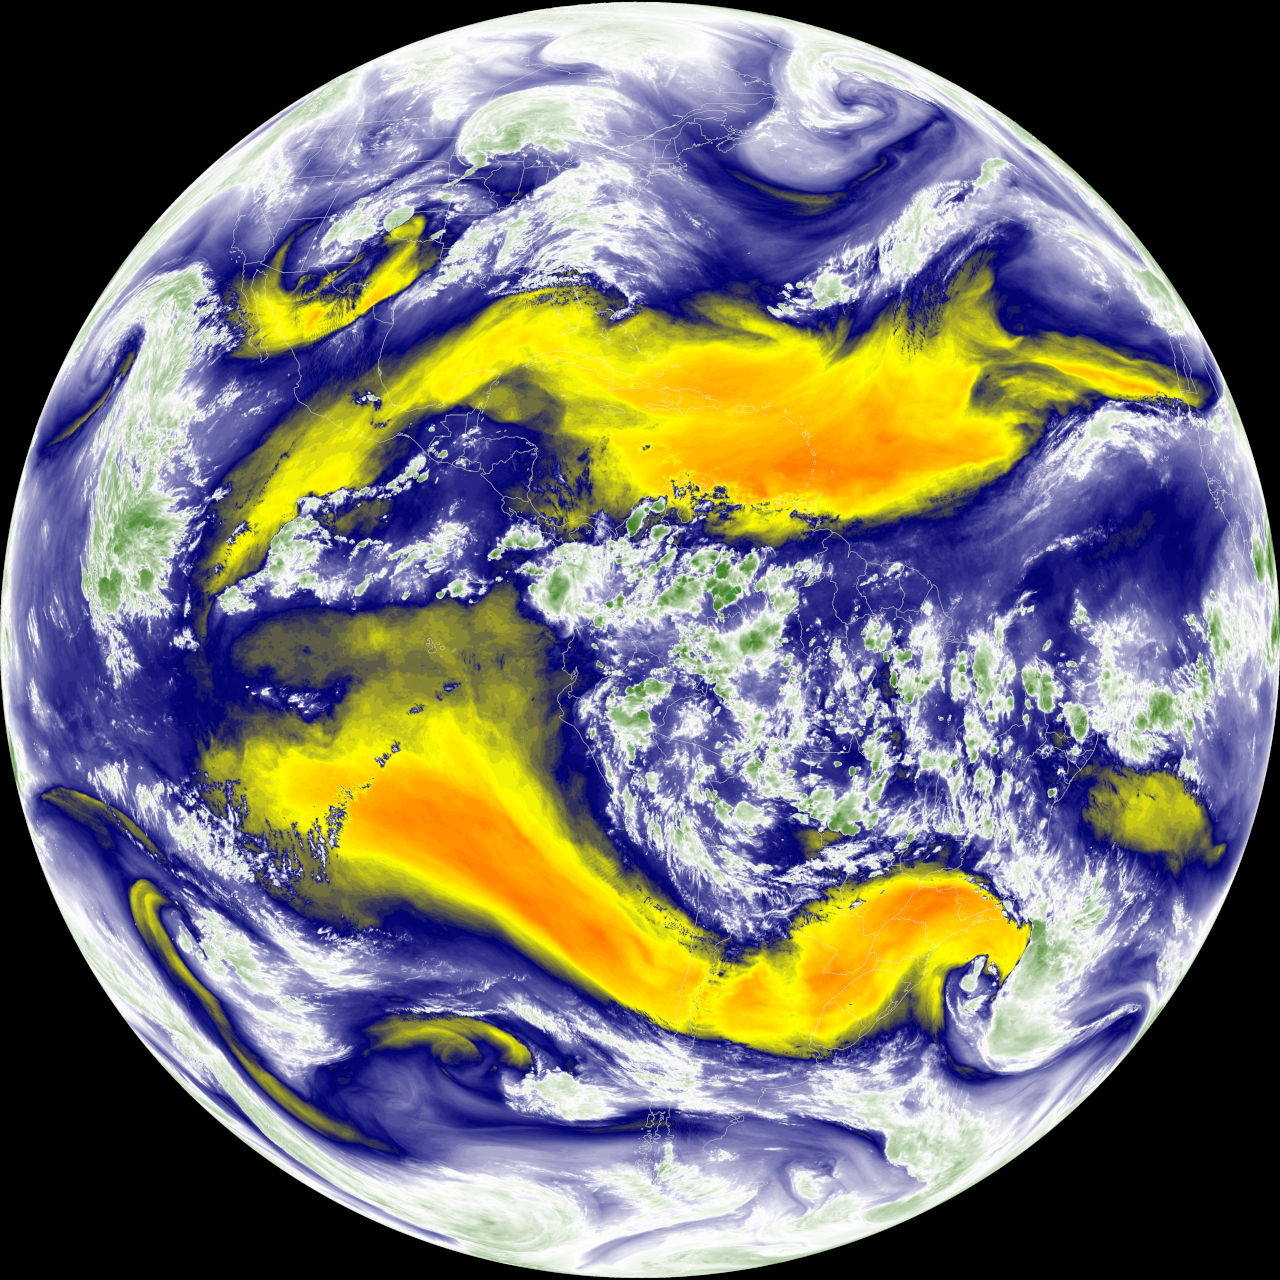 Colorful full disk image received from GOES 16. Enhanced with software post processing.